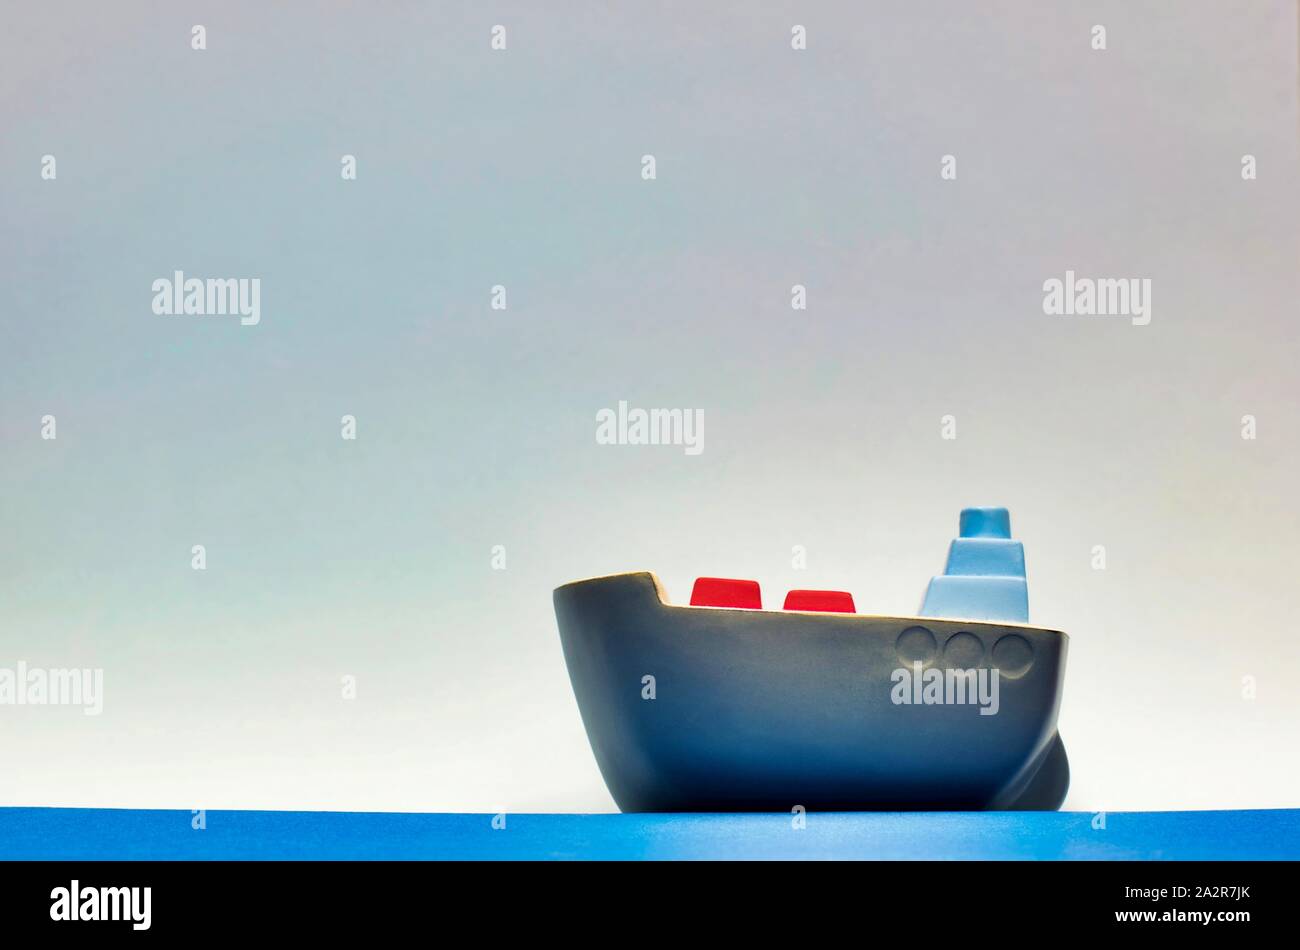 A gray toy cargo ship cruising on water sitting low in the frame, with open sky in the background with room for text above. Stock Photo